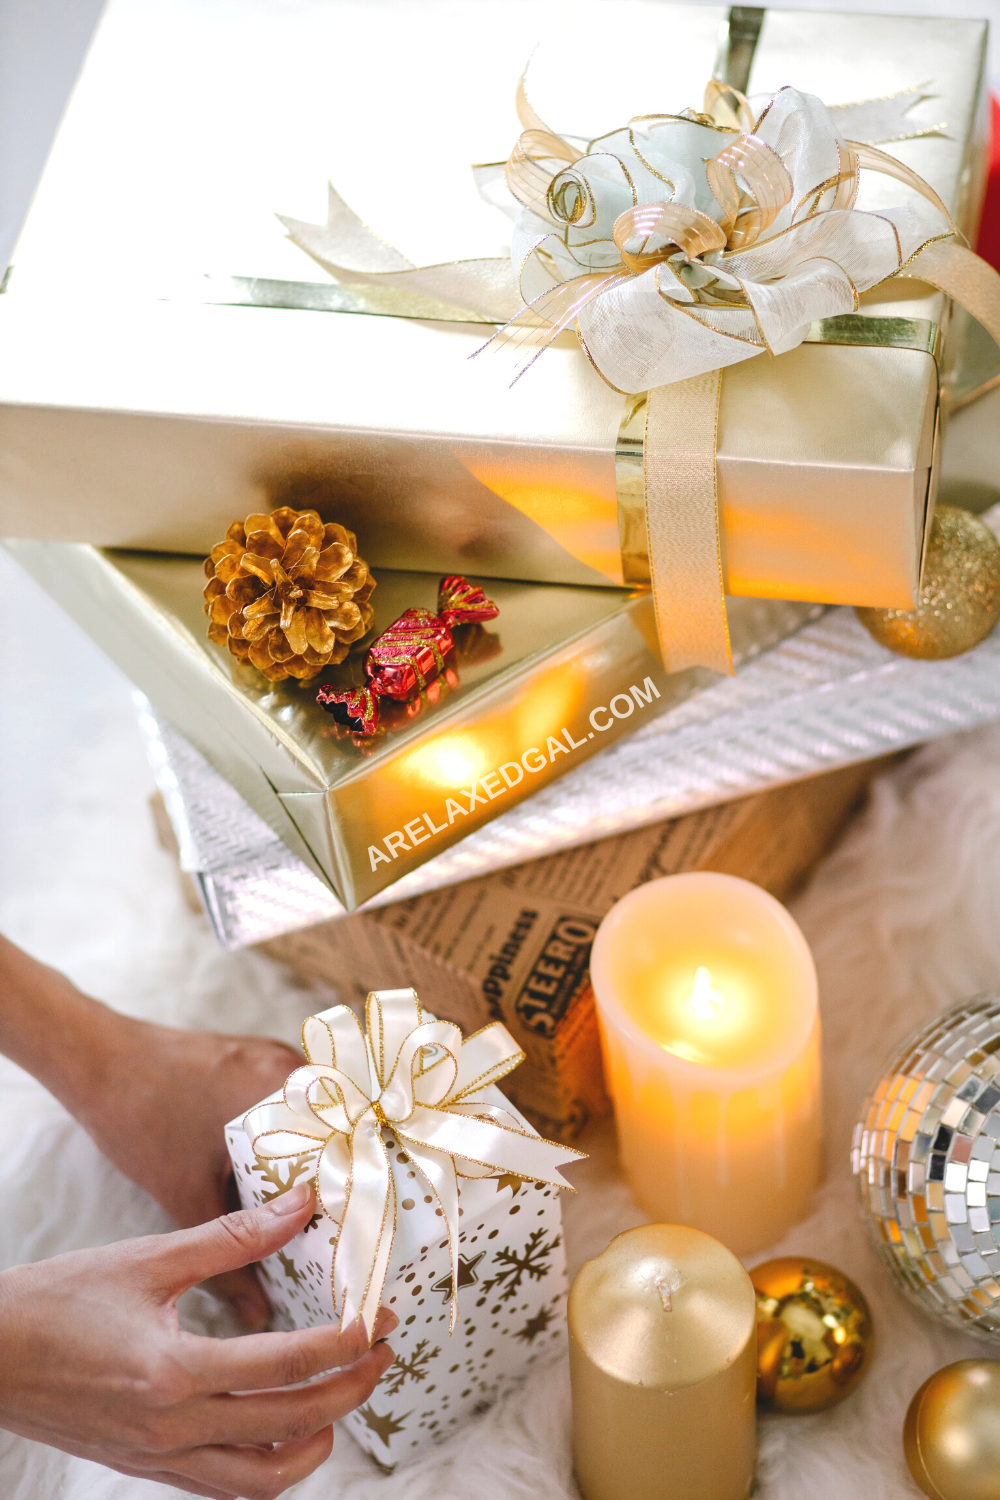 women placing gold wrapped gifts from sally beauty.